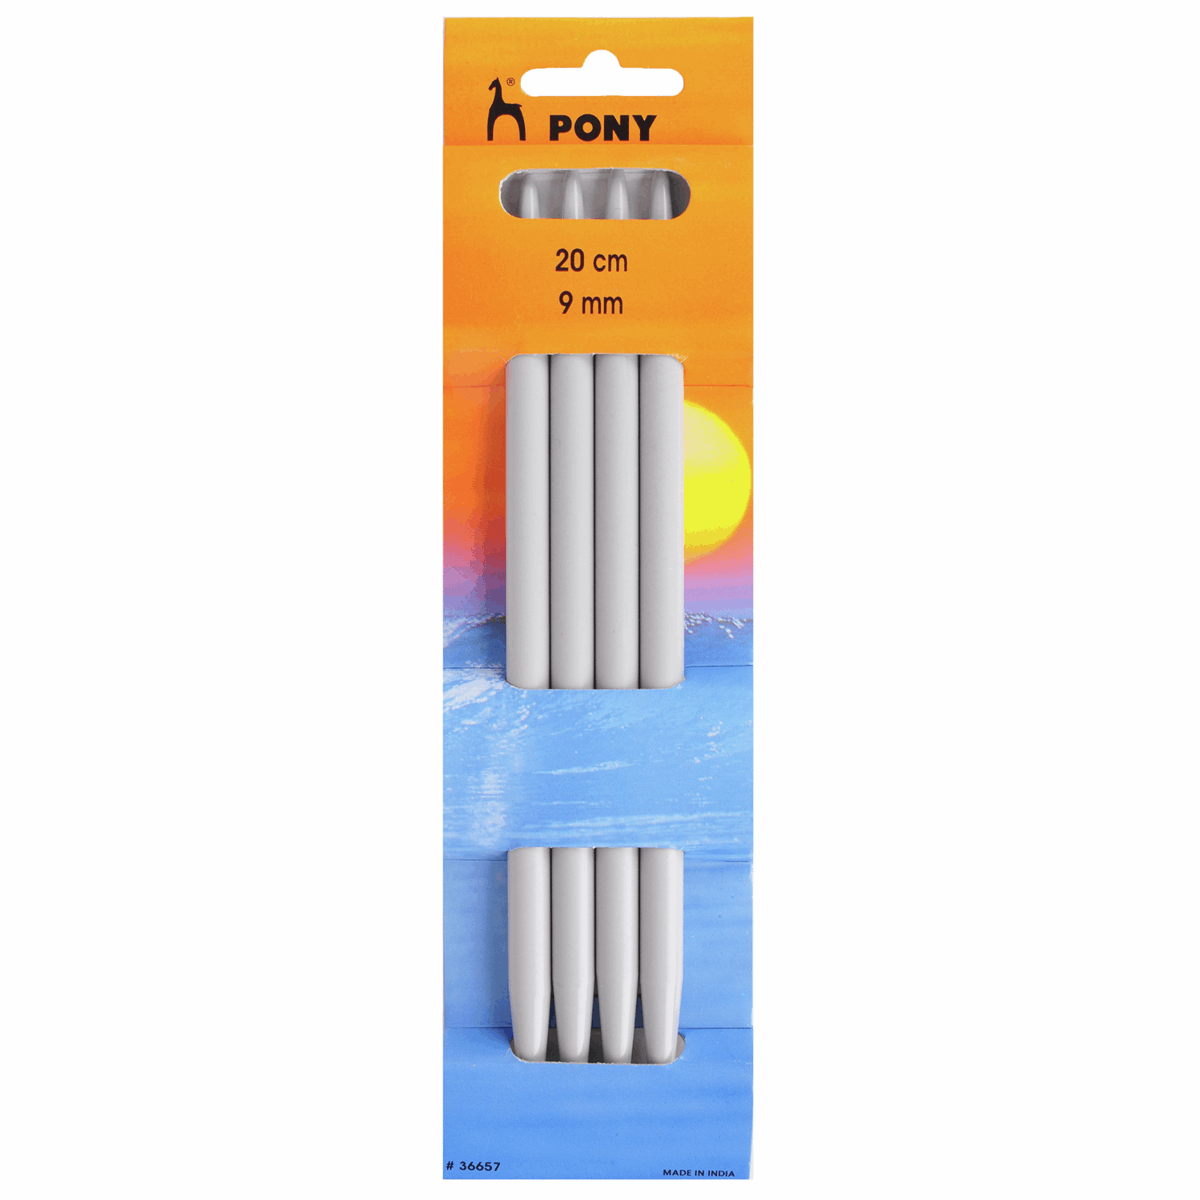 PONY Double-Ended Knitting Pins - 20cm x 9mm (Set of 4)